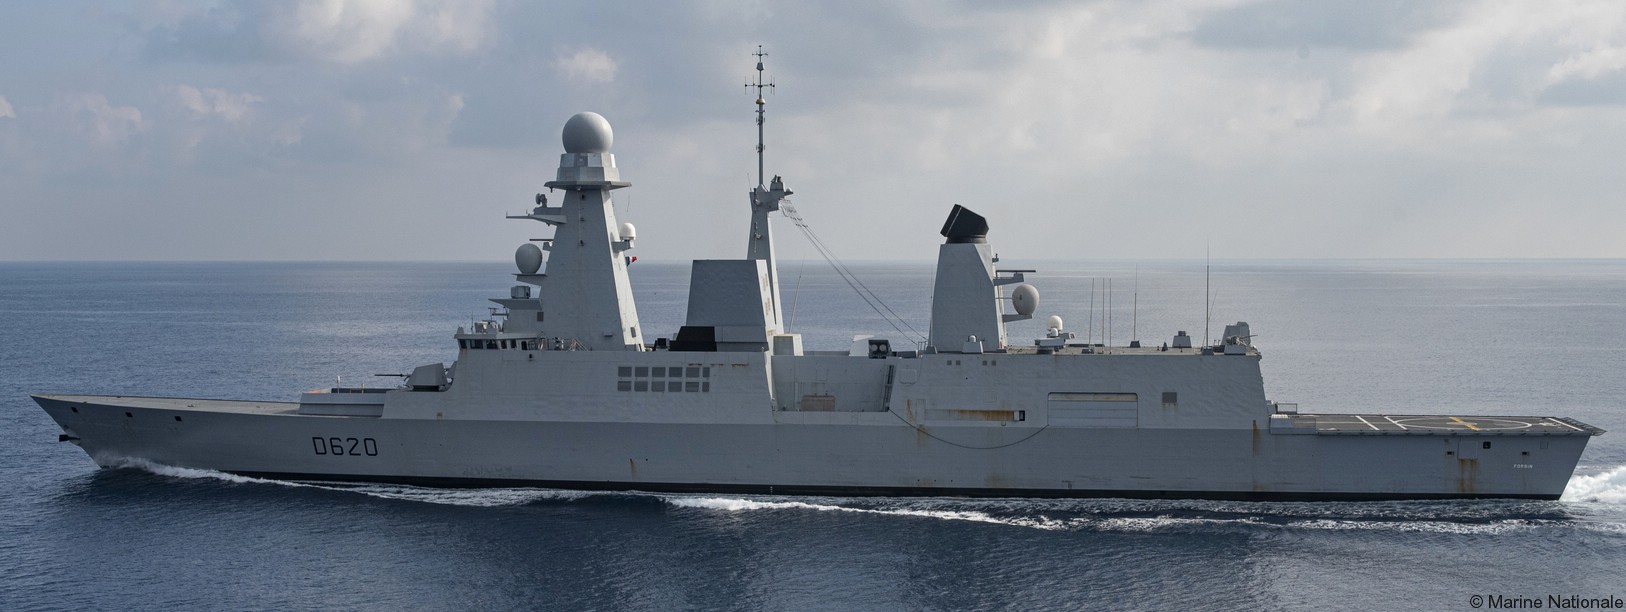 d-620 fs forbin horizon class guided missile frigate fregate anti-air-warfare aaw french navy marine nationale 21 sylver vls aster sam exocet mm40